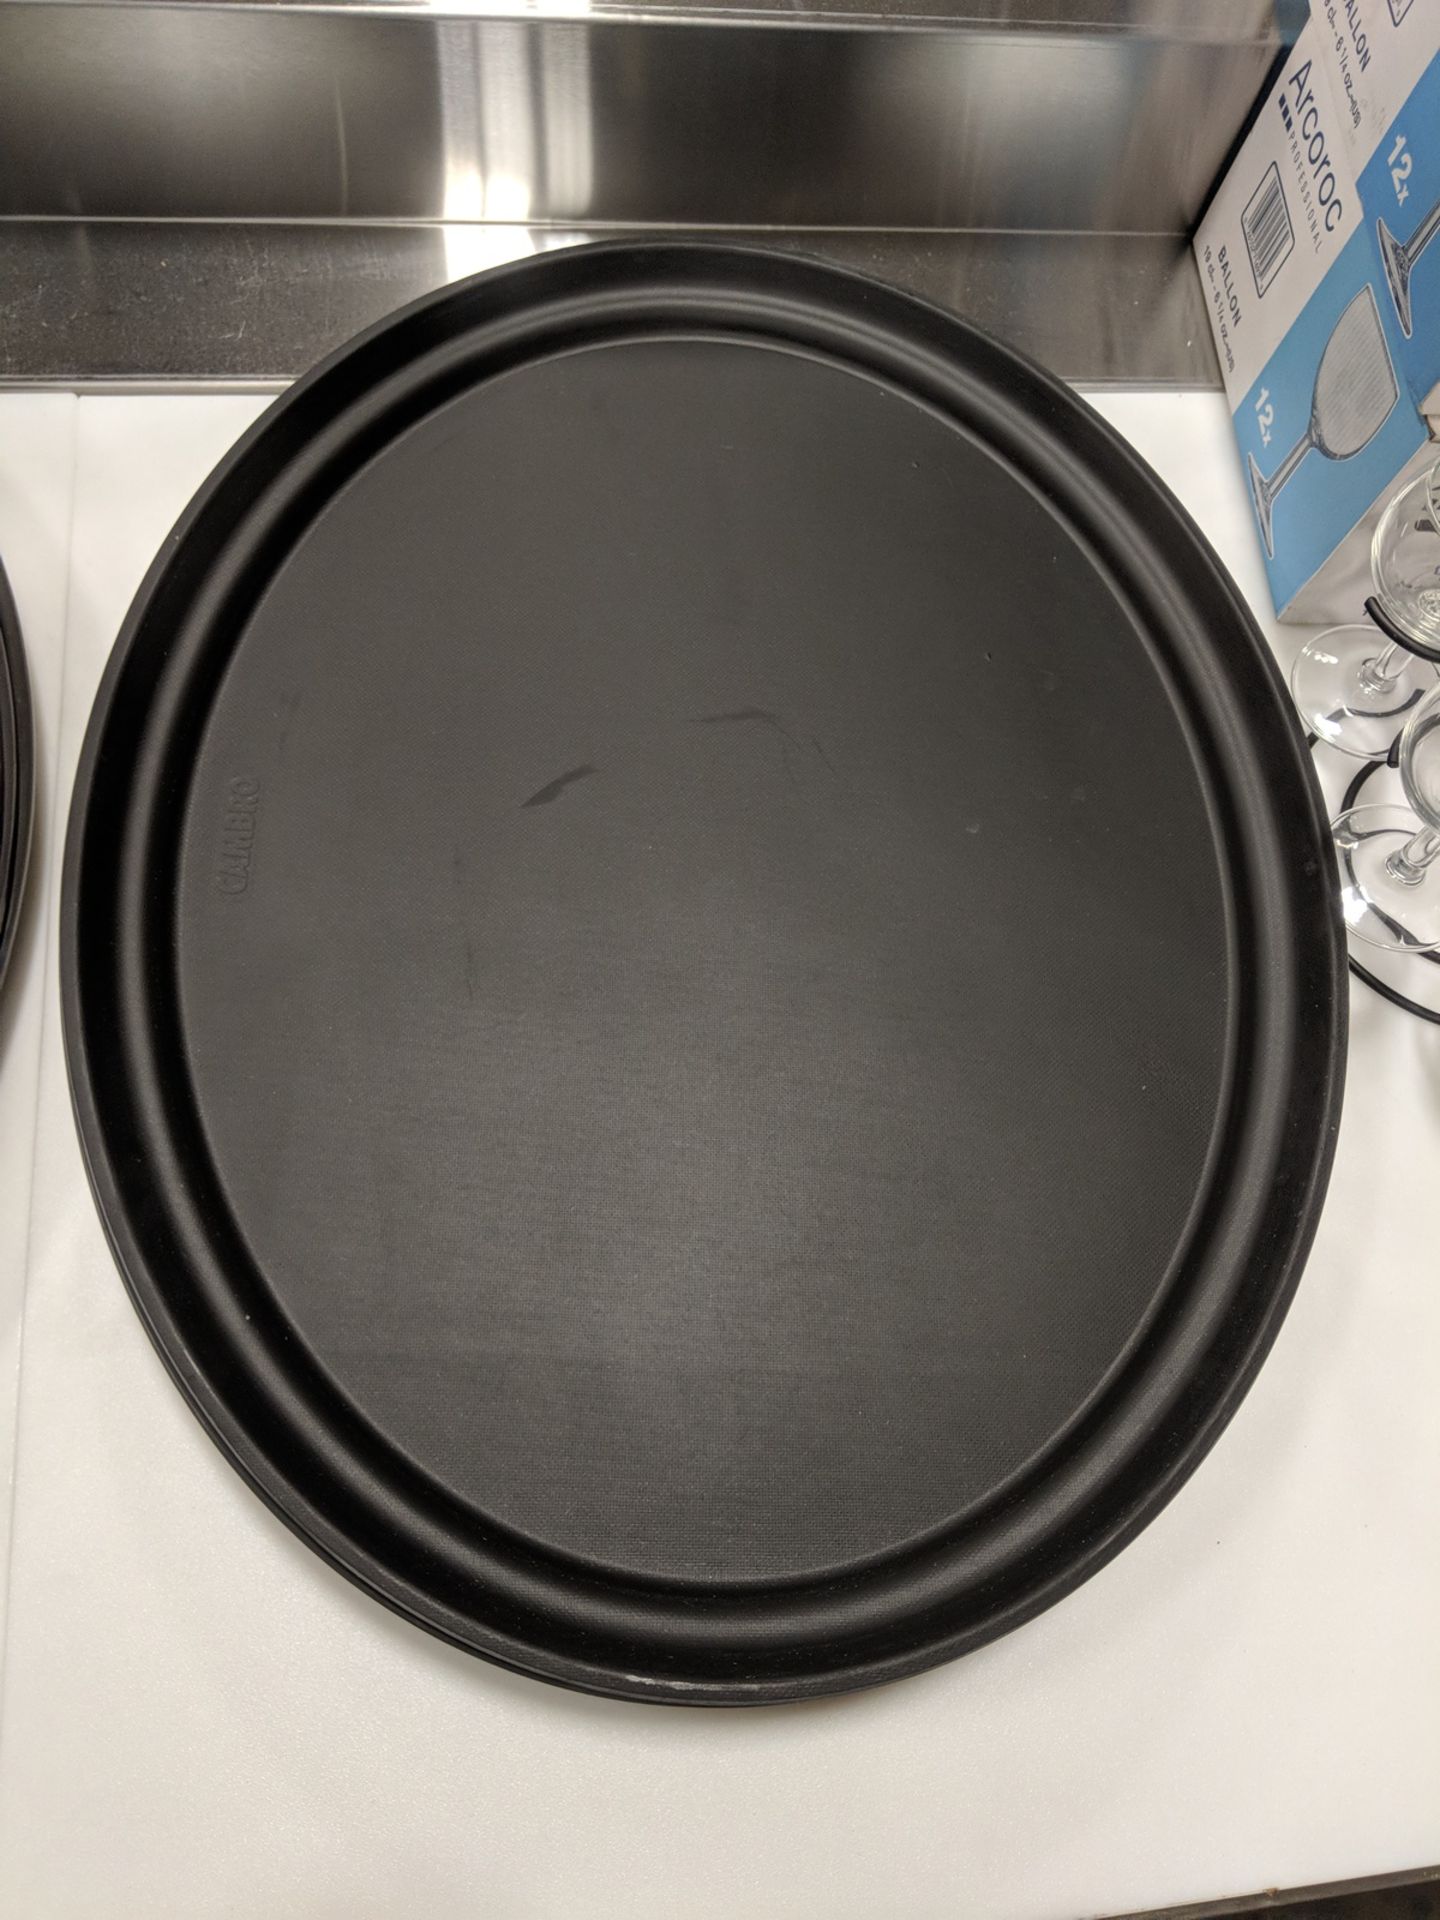 19" x 23" Oval Camtread Serving Trays, Cambro 2500CT110 - Lot of 6